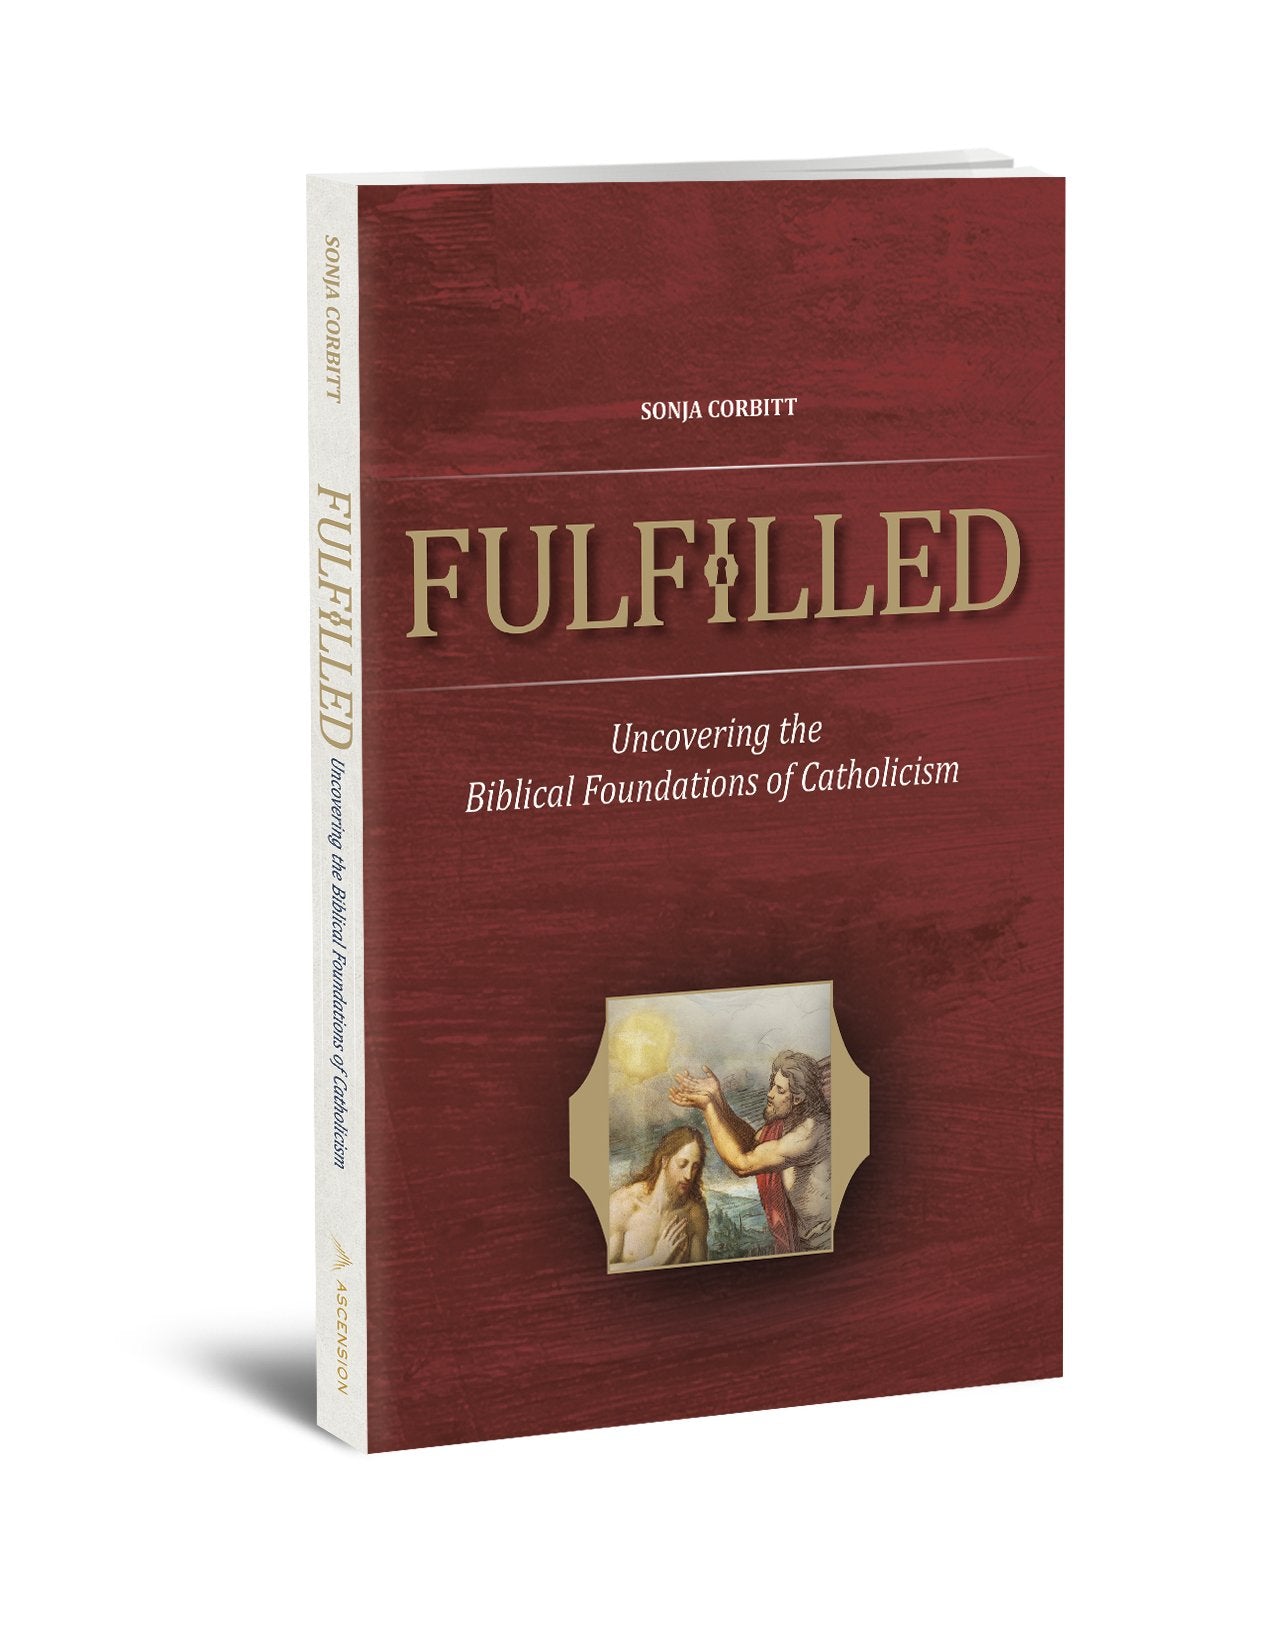 Fulfilled Uncovering the Biblical Foundations of Catholicism